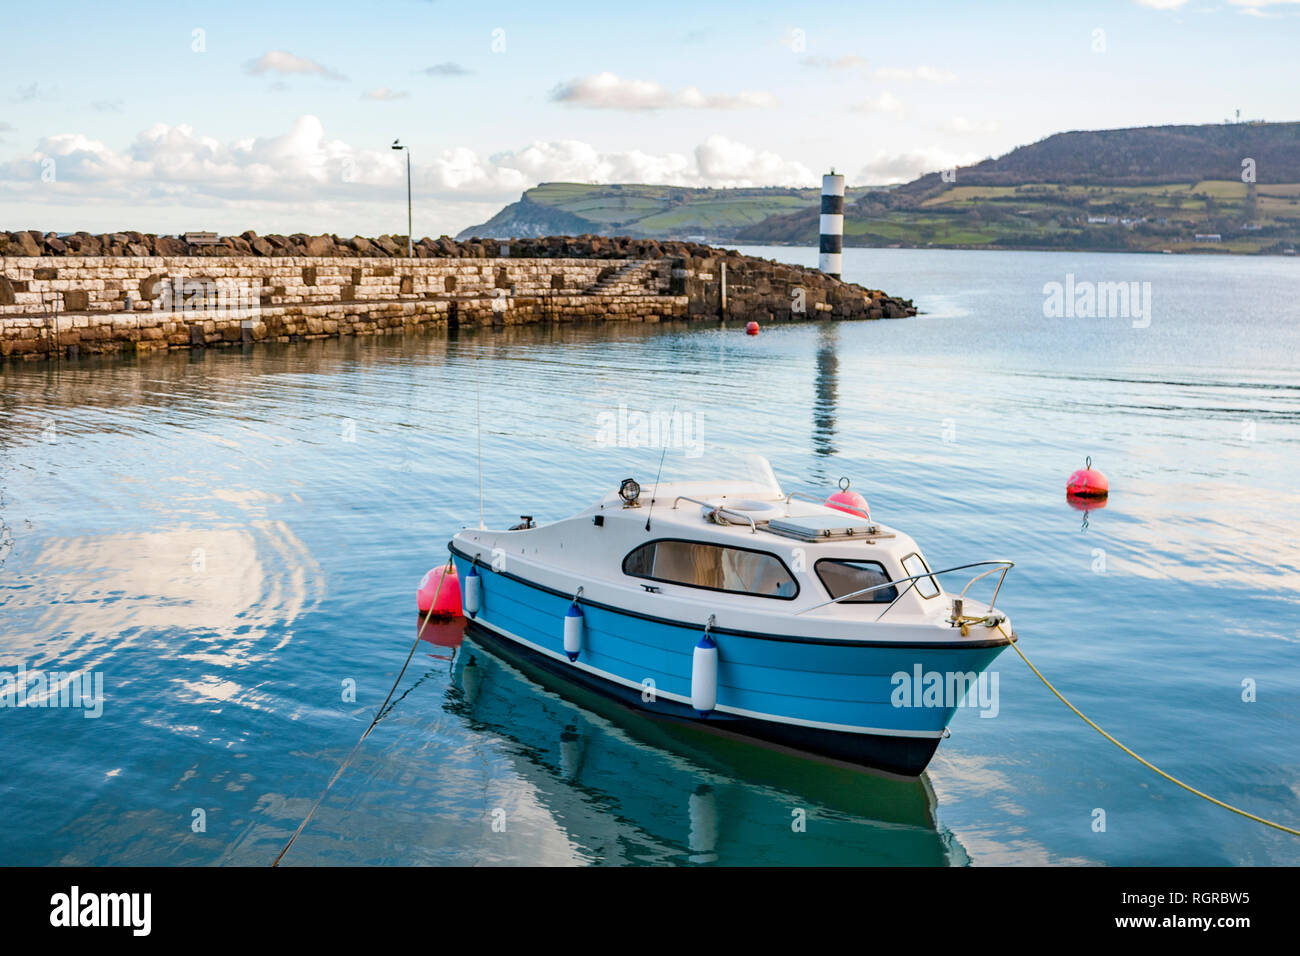 Picturesque harbour on the shores of Carnlough Bay. Typical village in Northern Ireland. Stock Photo